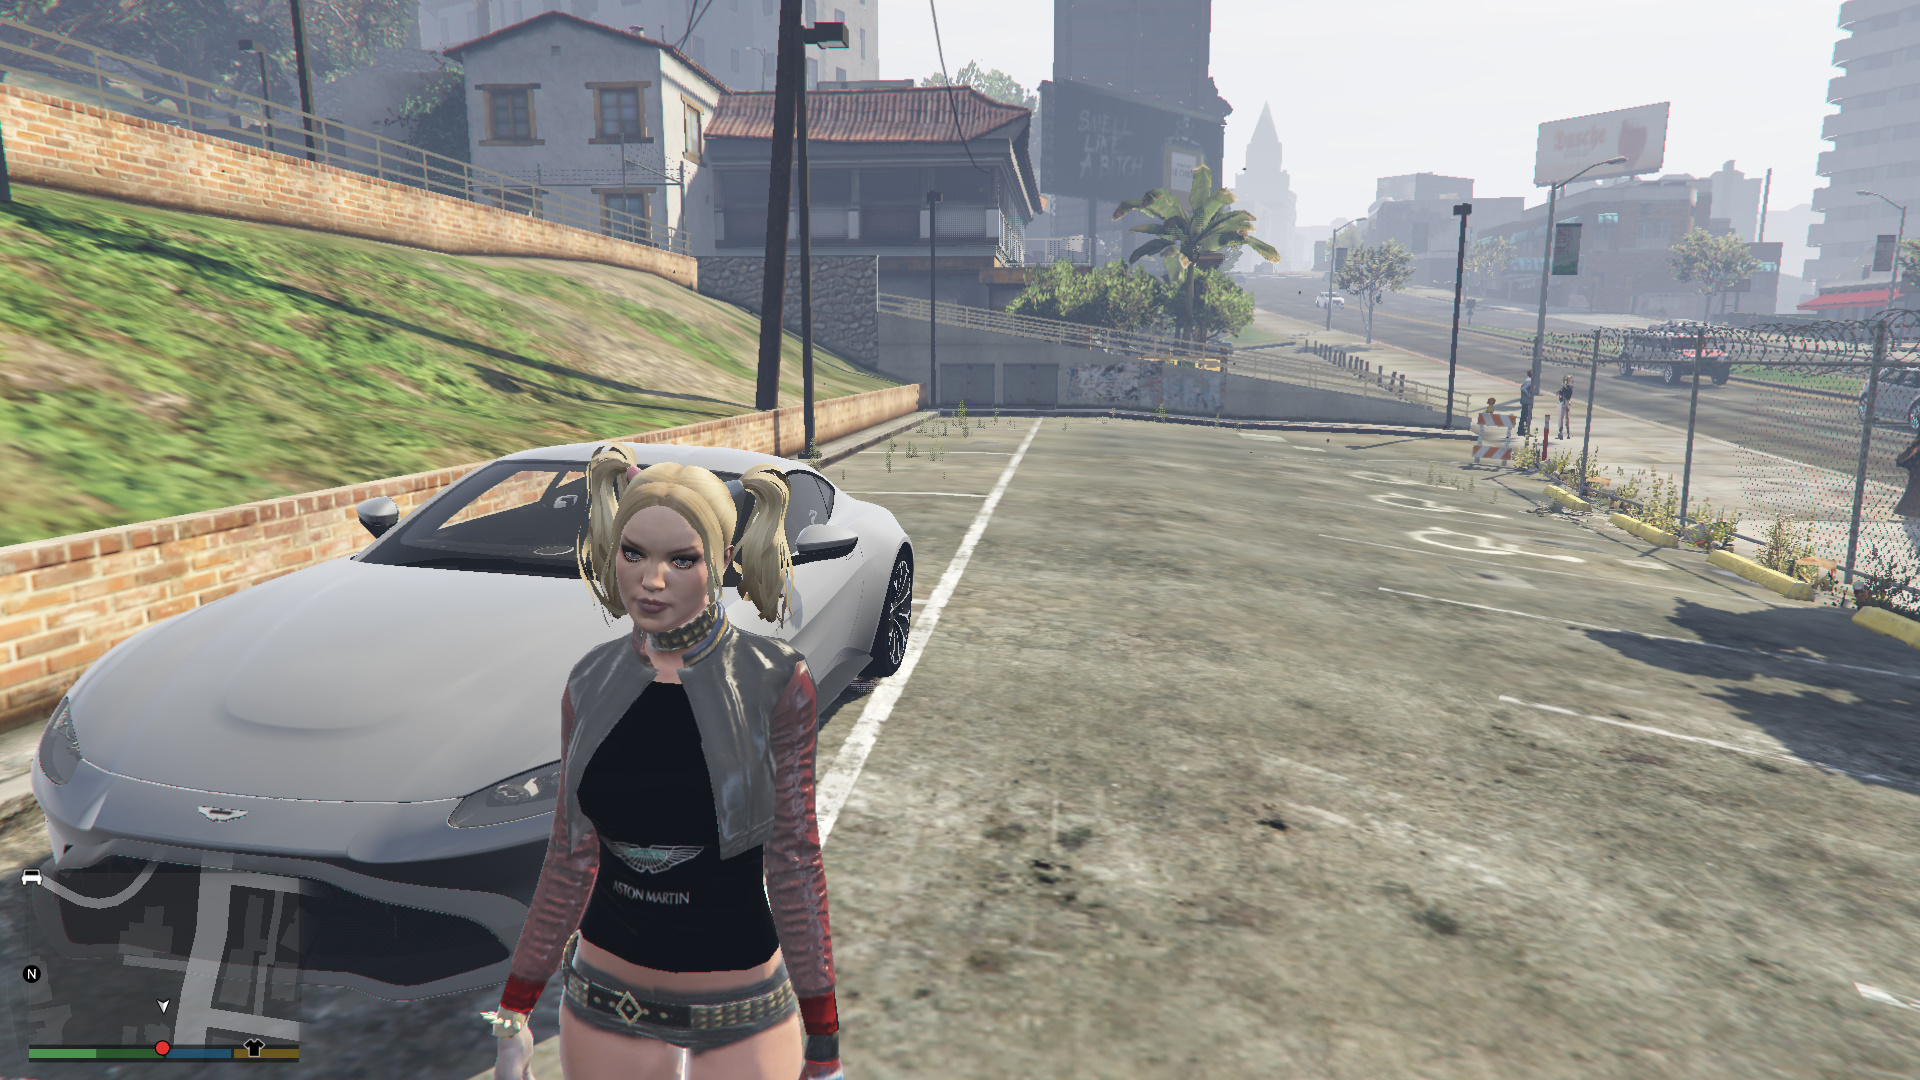 Aston Martin Outfit With Leather Hot Pants For Harley Quinn Gta5 Images, Photos, Reviews